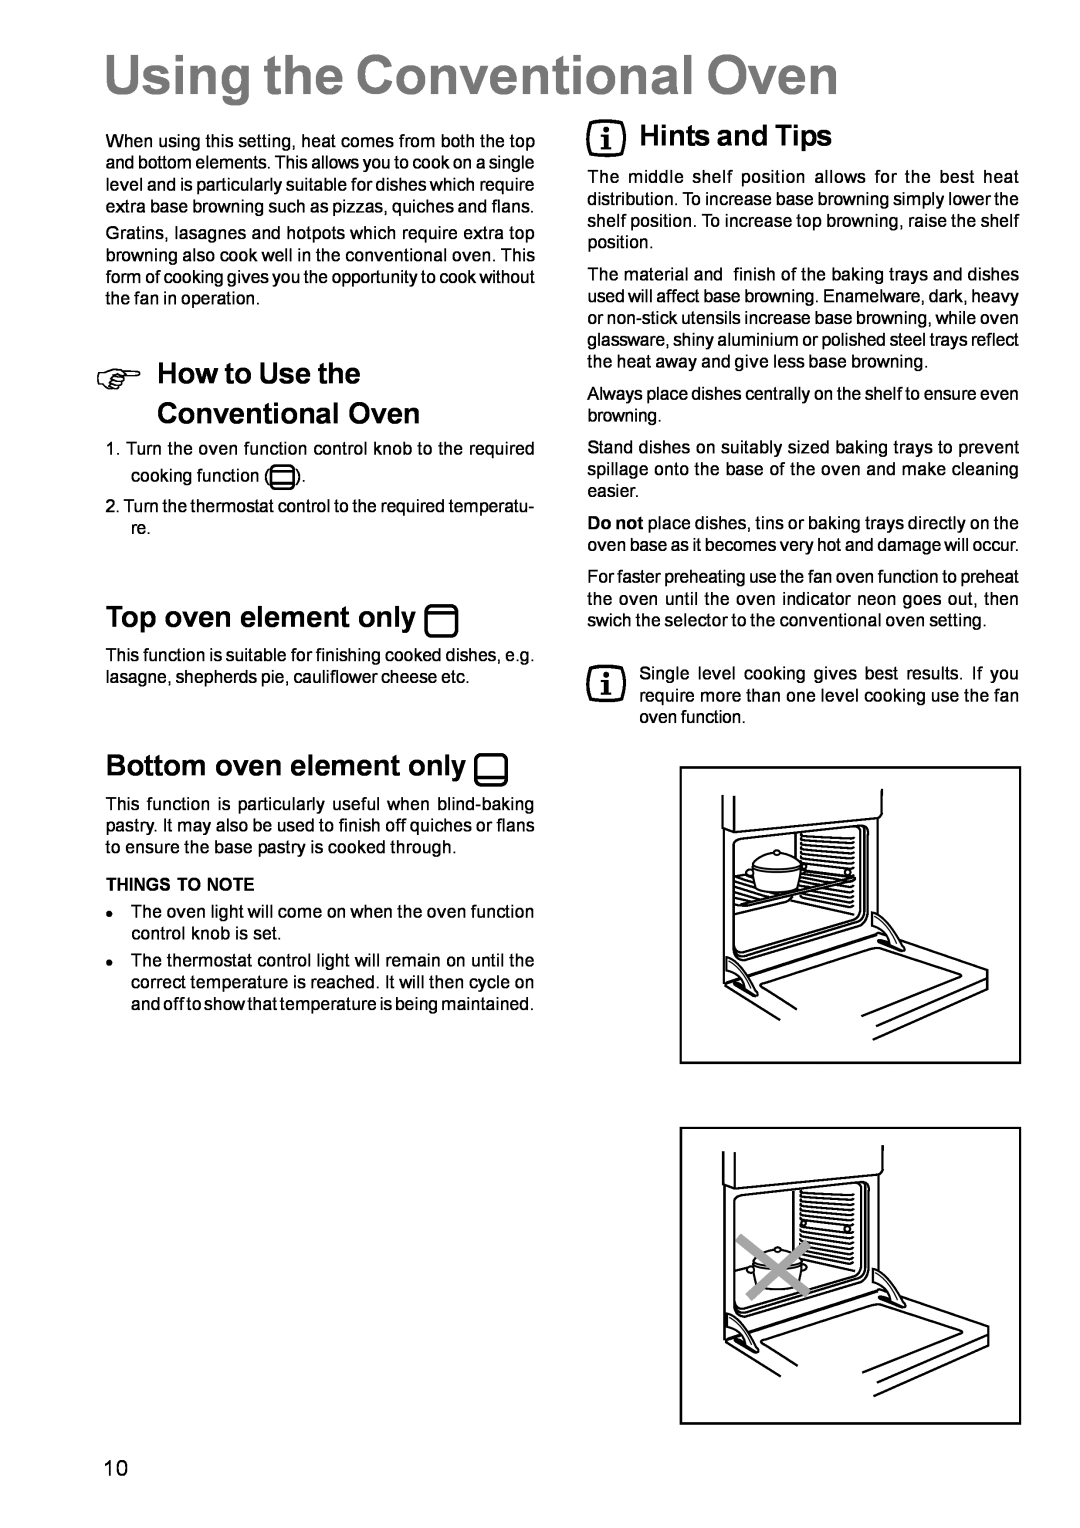 Zanussi ZCM 631 Using the Conventional Oven, Φ How to Use the Conventional Oven, Top oven element only, Hints and Tips 